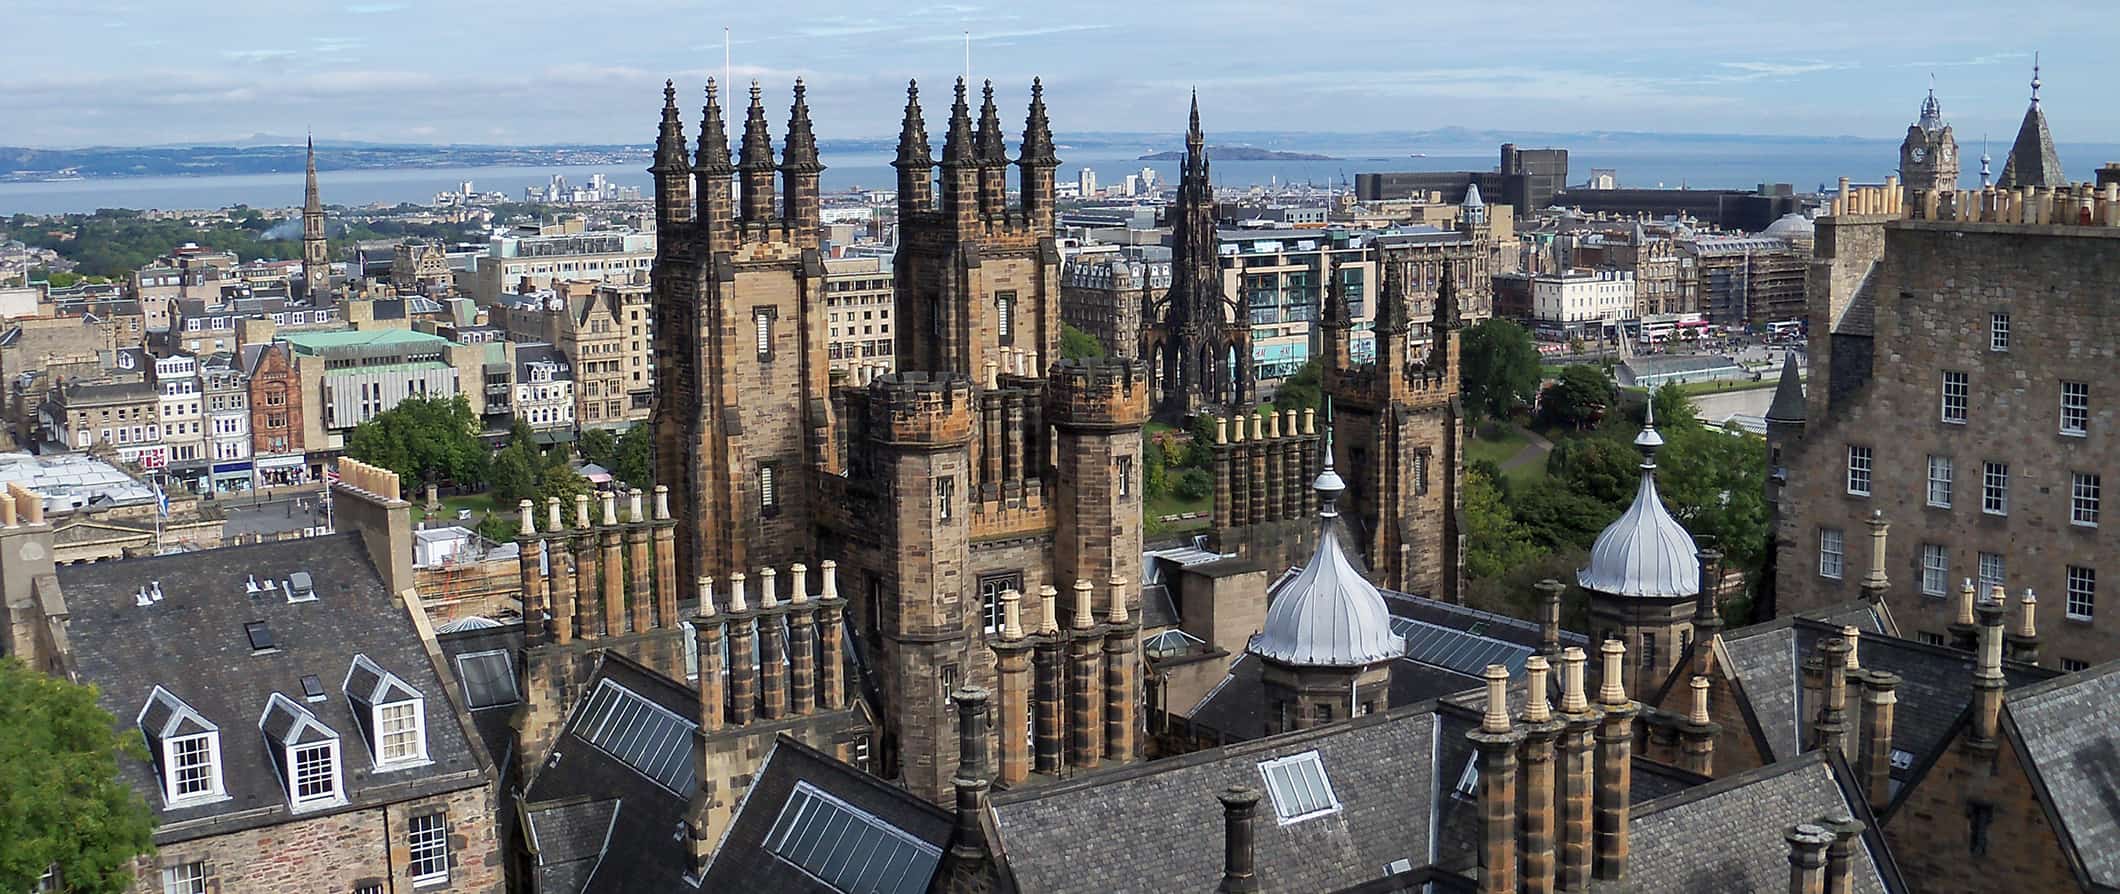 The historic buildings of Edinburgh and its charming skyline